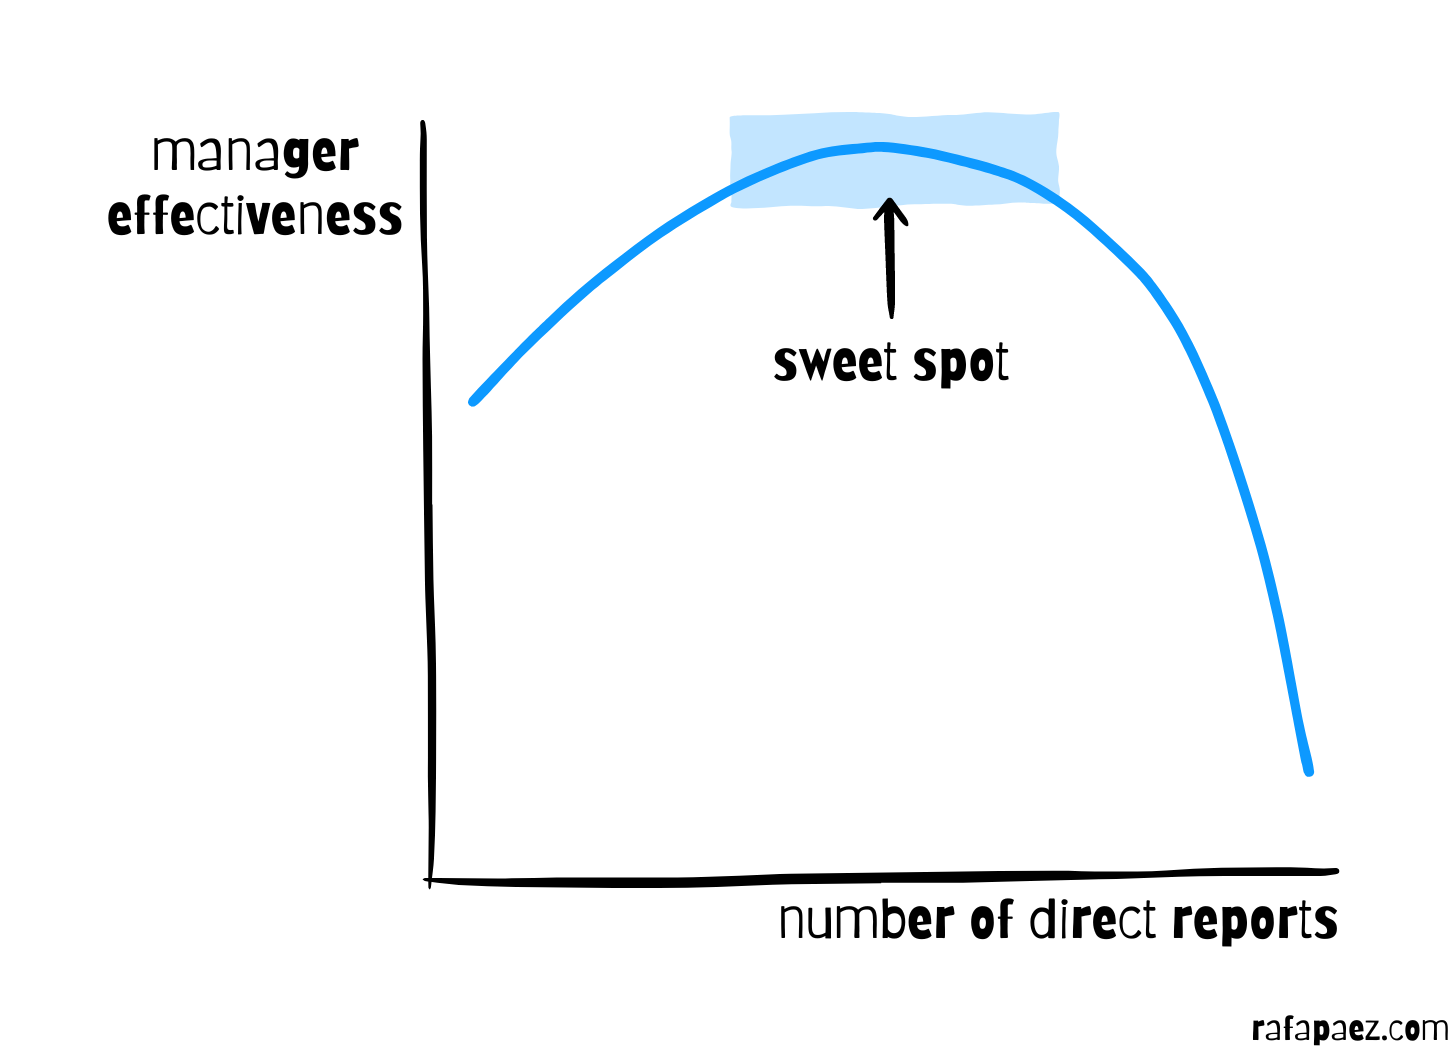 Manager Effectiveness vs Number of Direct Reports